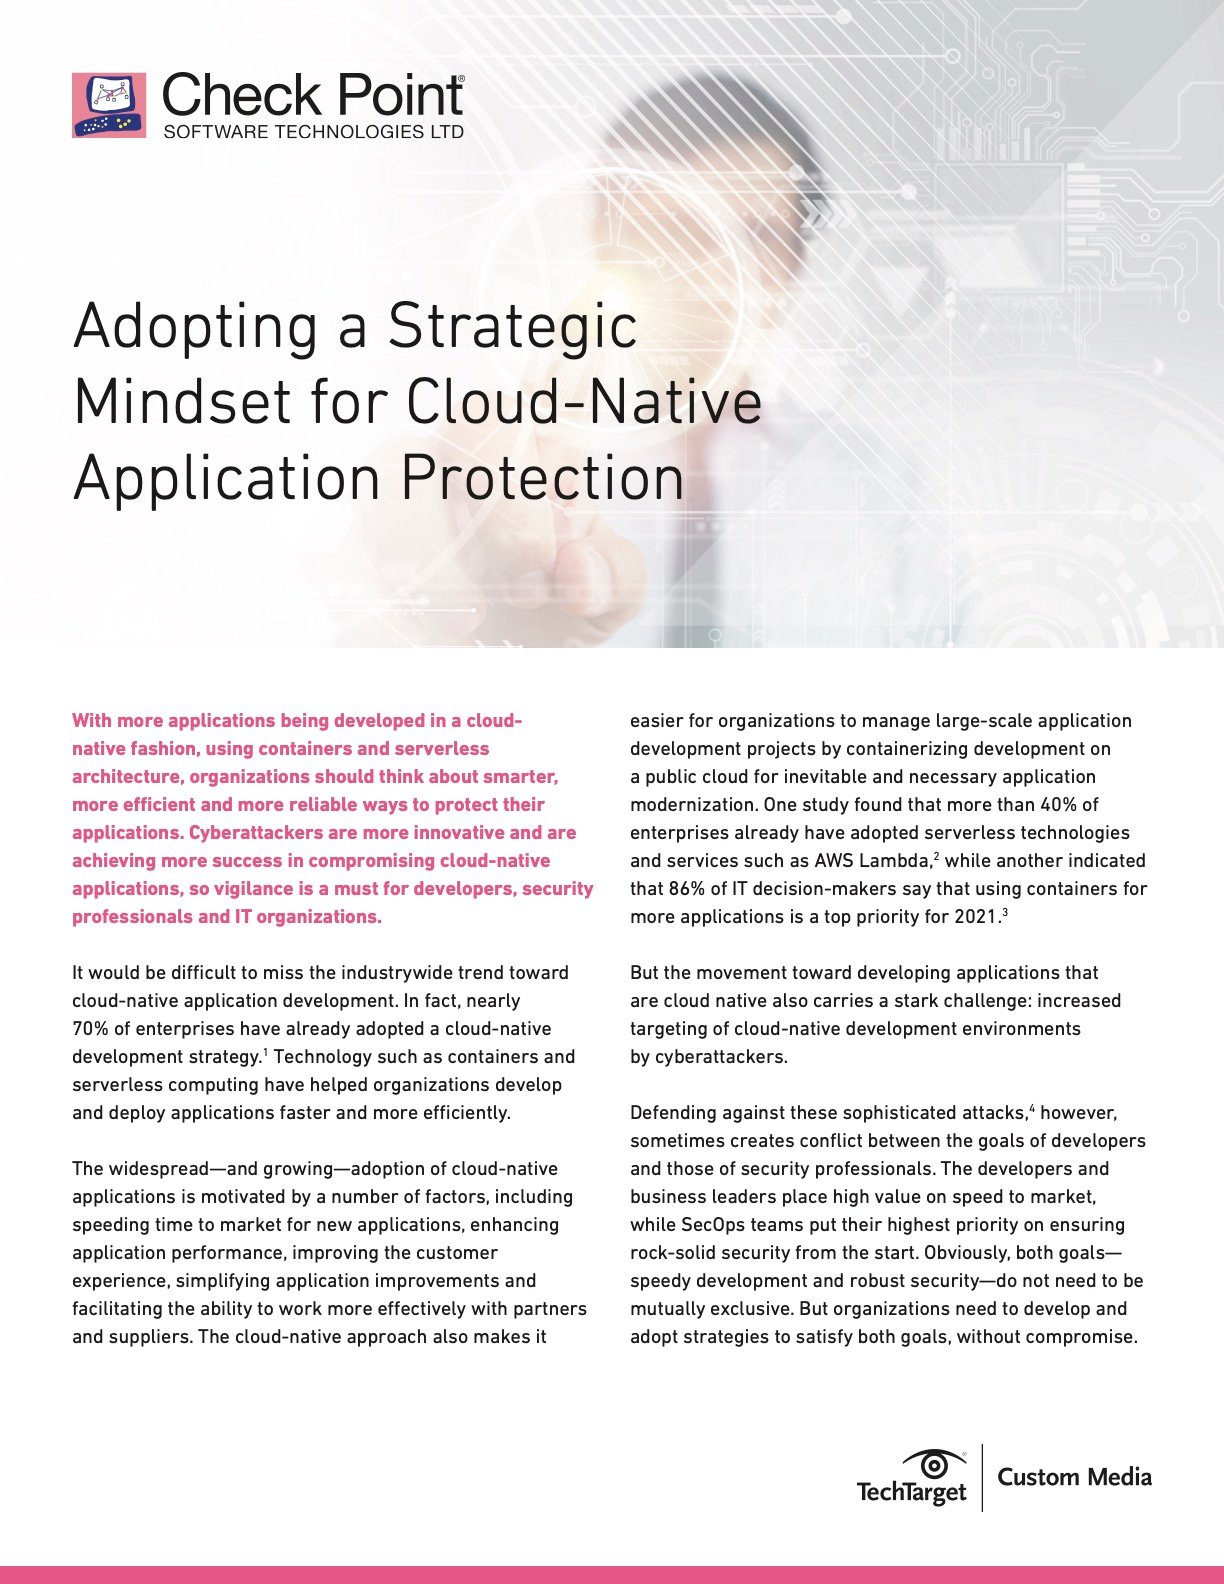 cover_Adopting a Strategic Mindset for Cloud-Native Application Protection